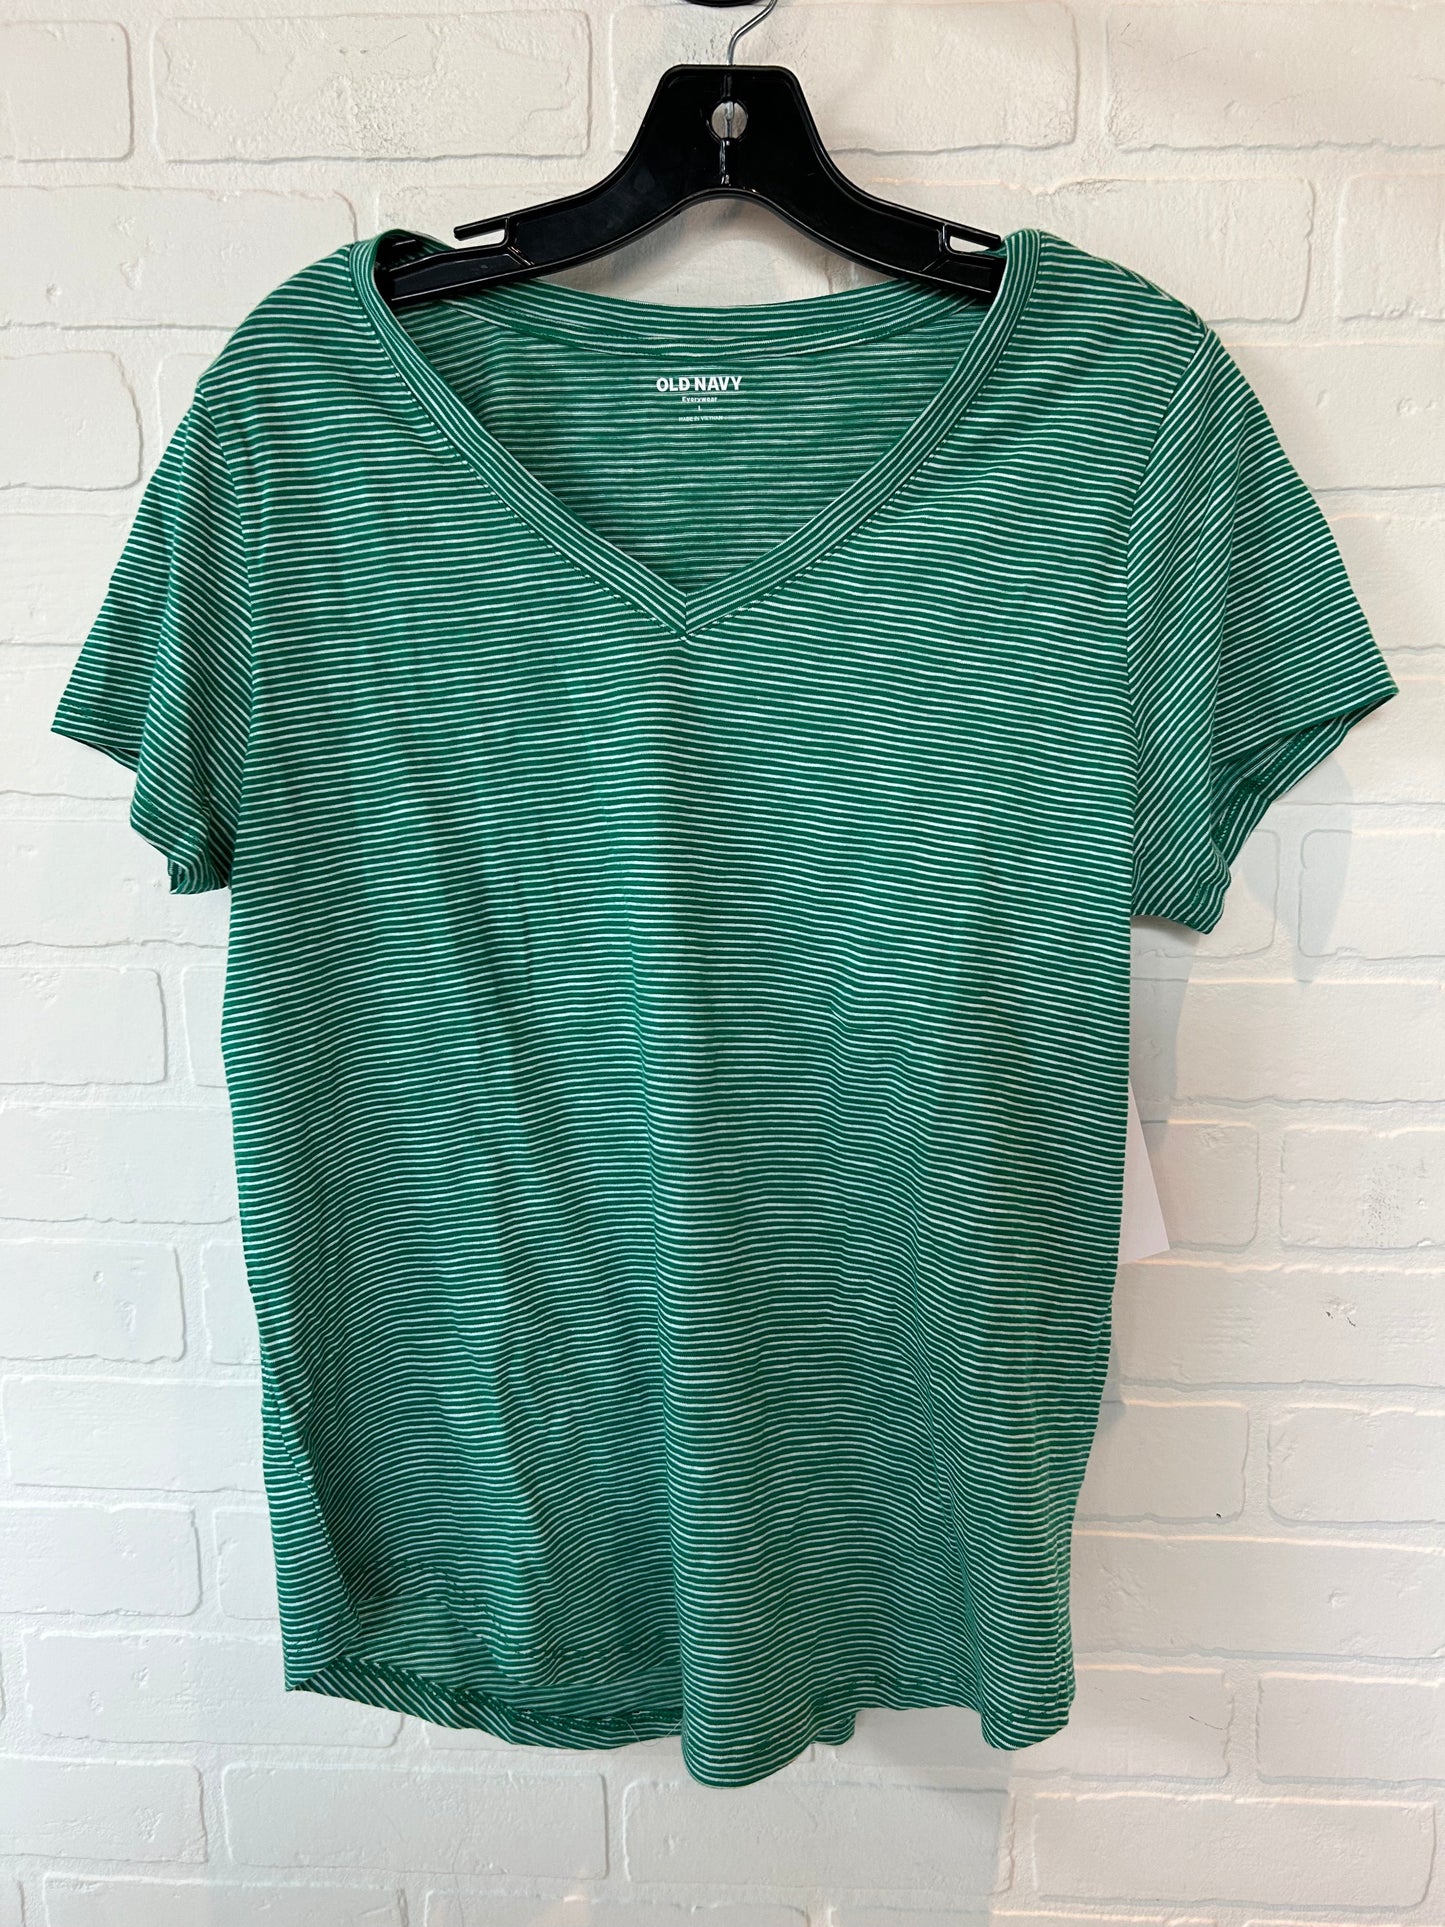 Green & White Top Short Sleeve Basic Old Navy, Size L